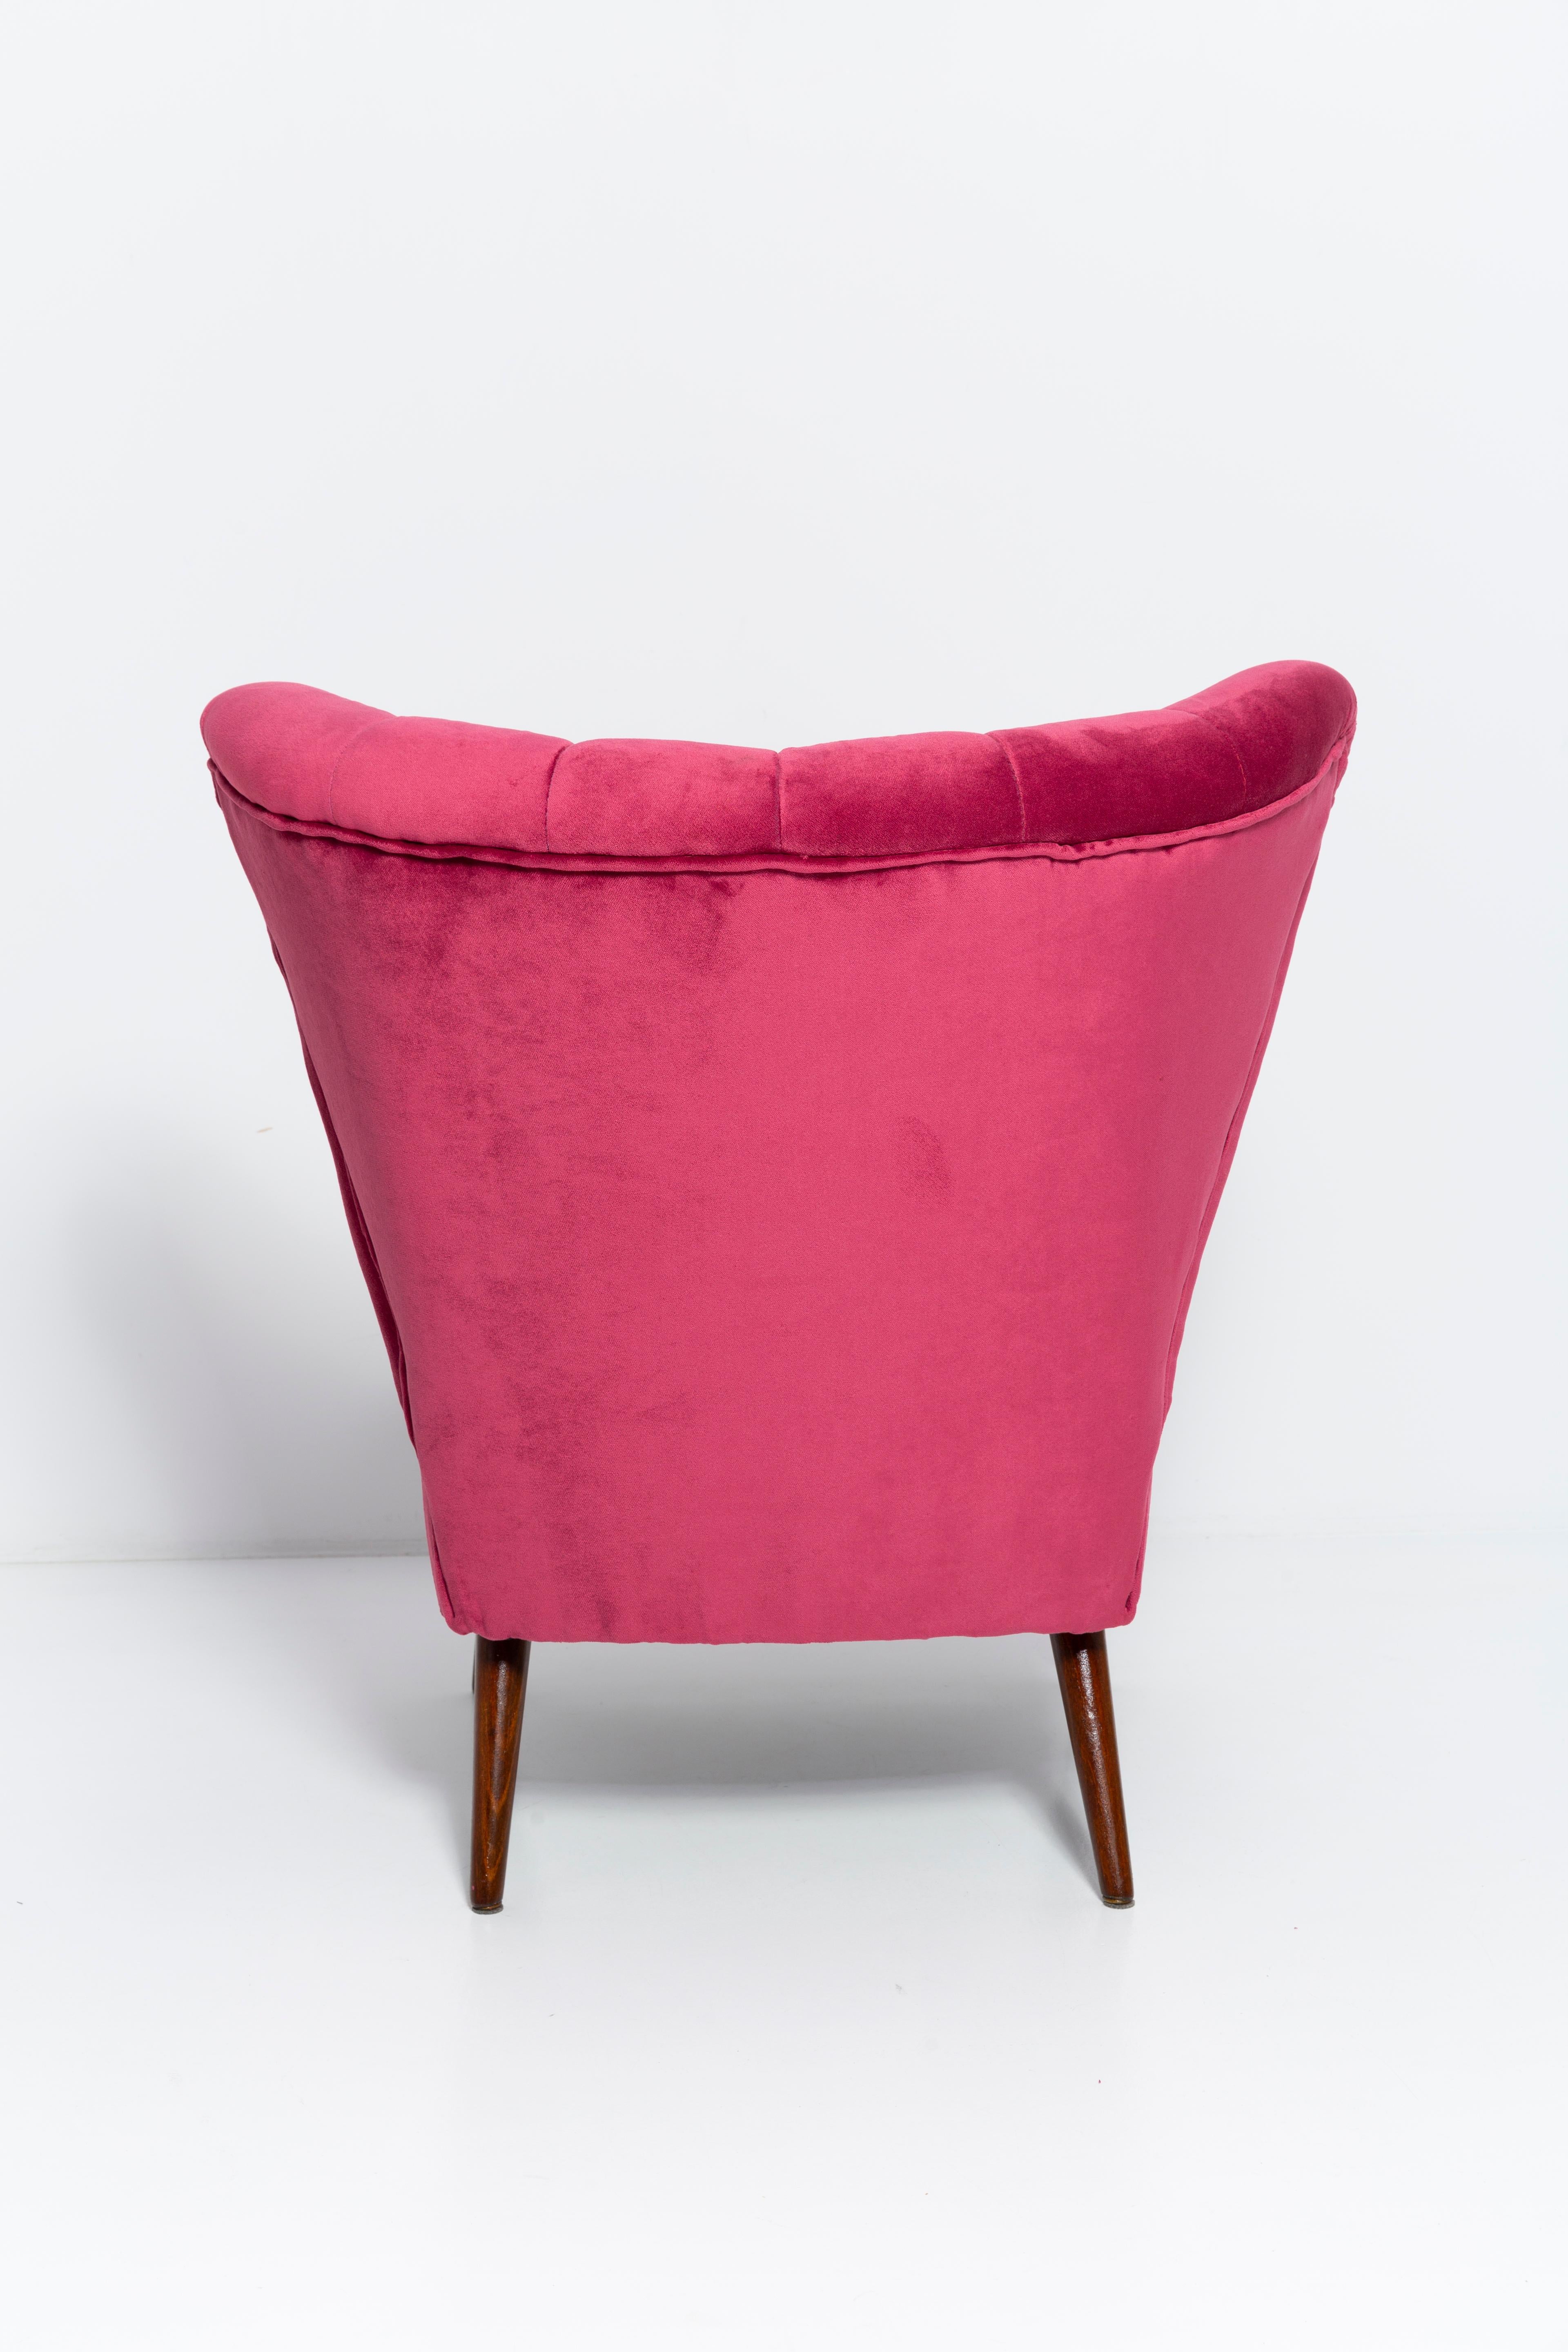 Four Midcentury Magenta Pink Velvet Club Armchairs, Europe, 1960s For Sale 6